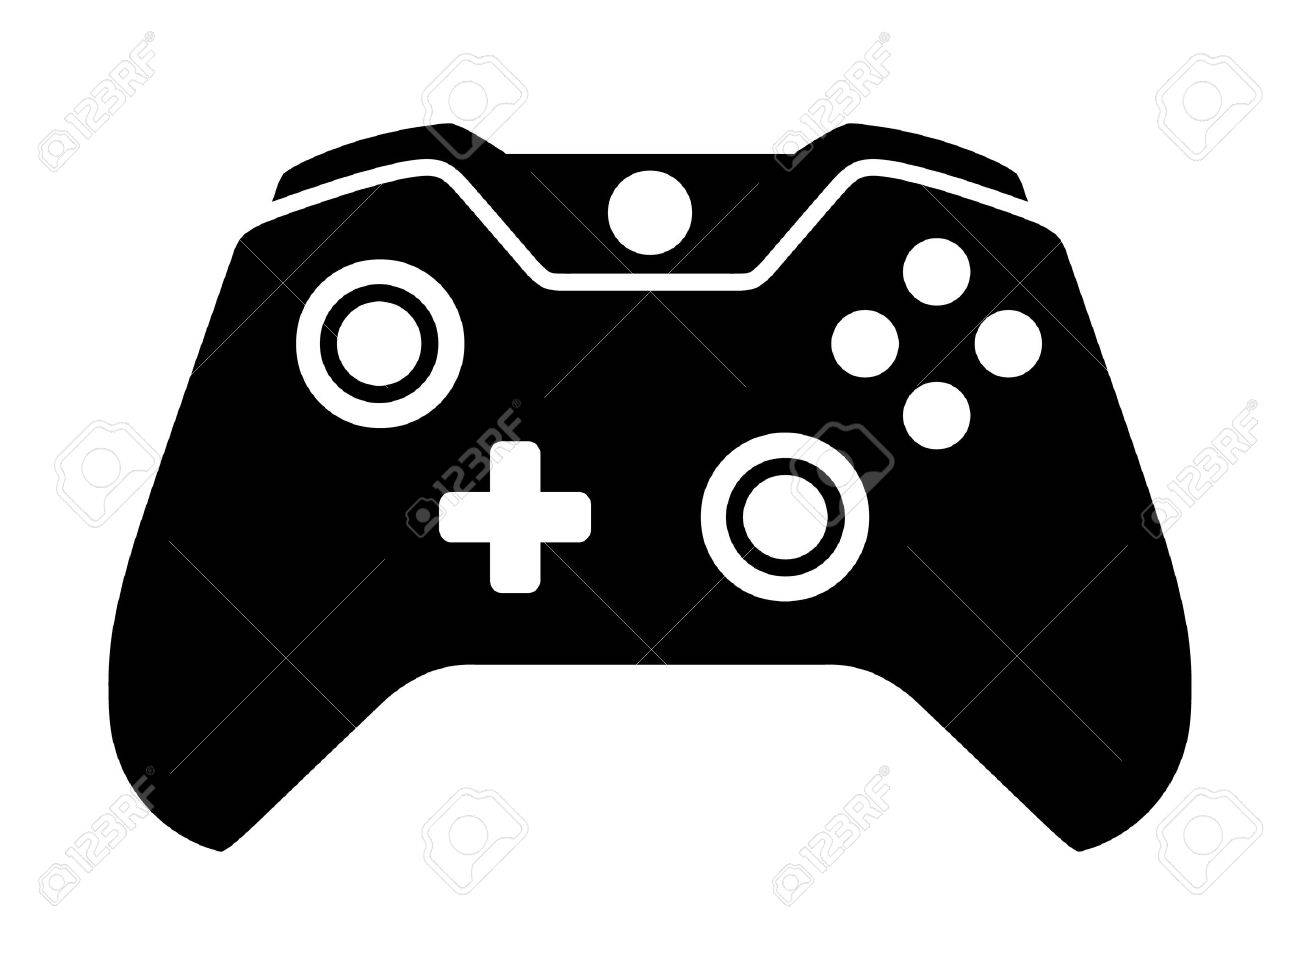 Video game controller clipart black and white